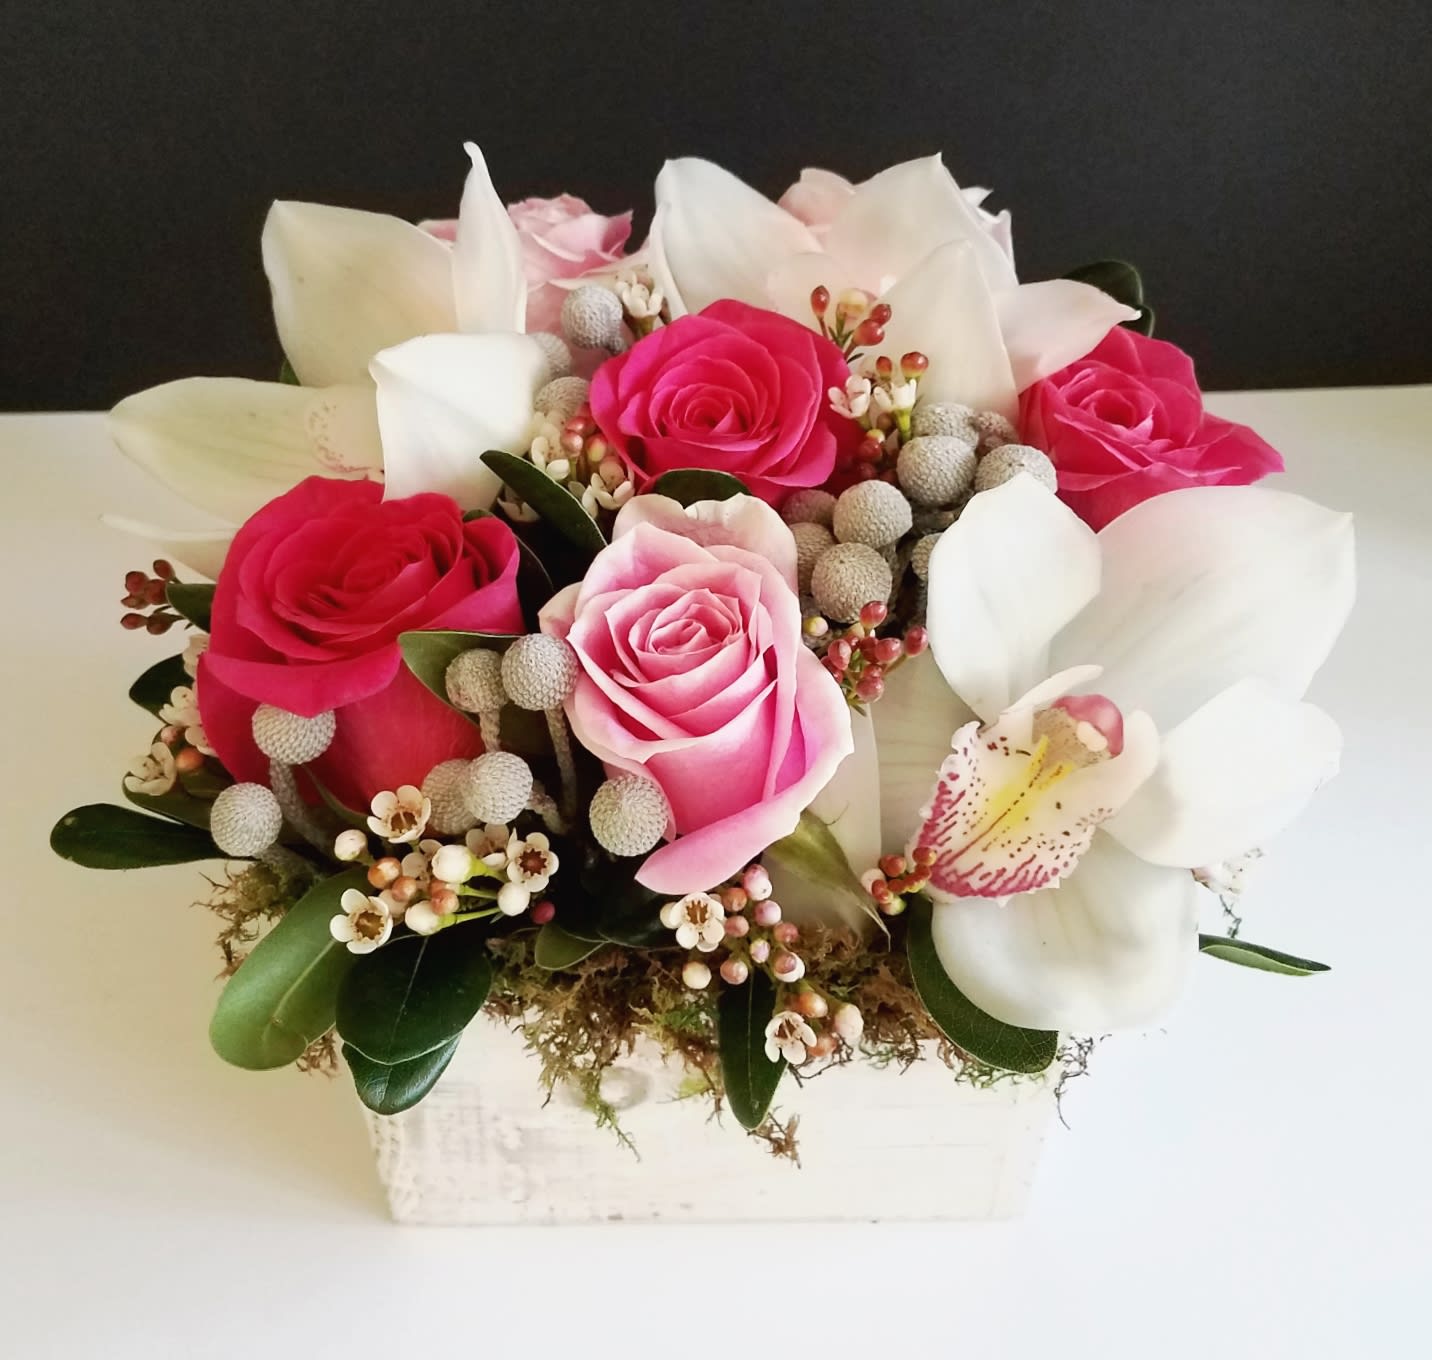 Sweet Innocence - This modern style garden box is filled with hot pink and light pink roses, white cymbidium orchids, wax flower and silvery berzelia balls.